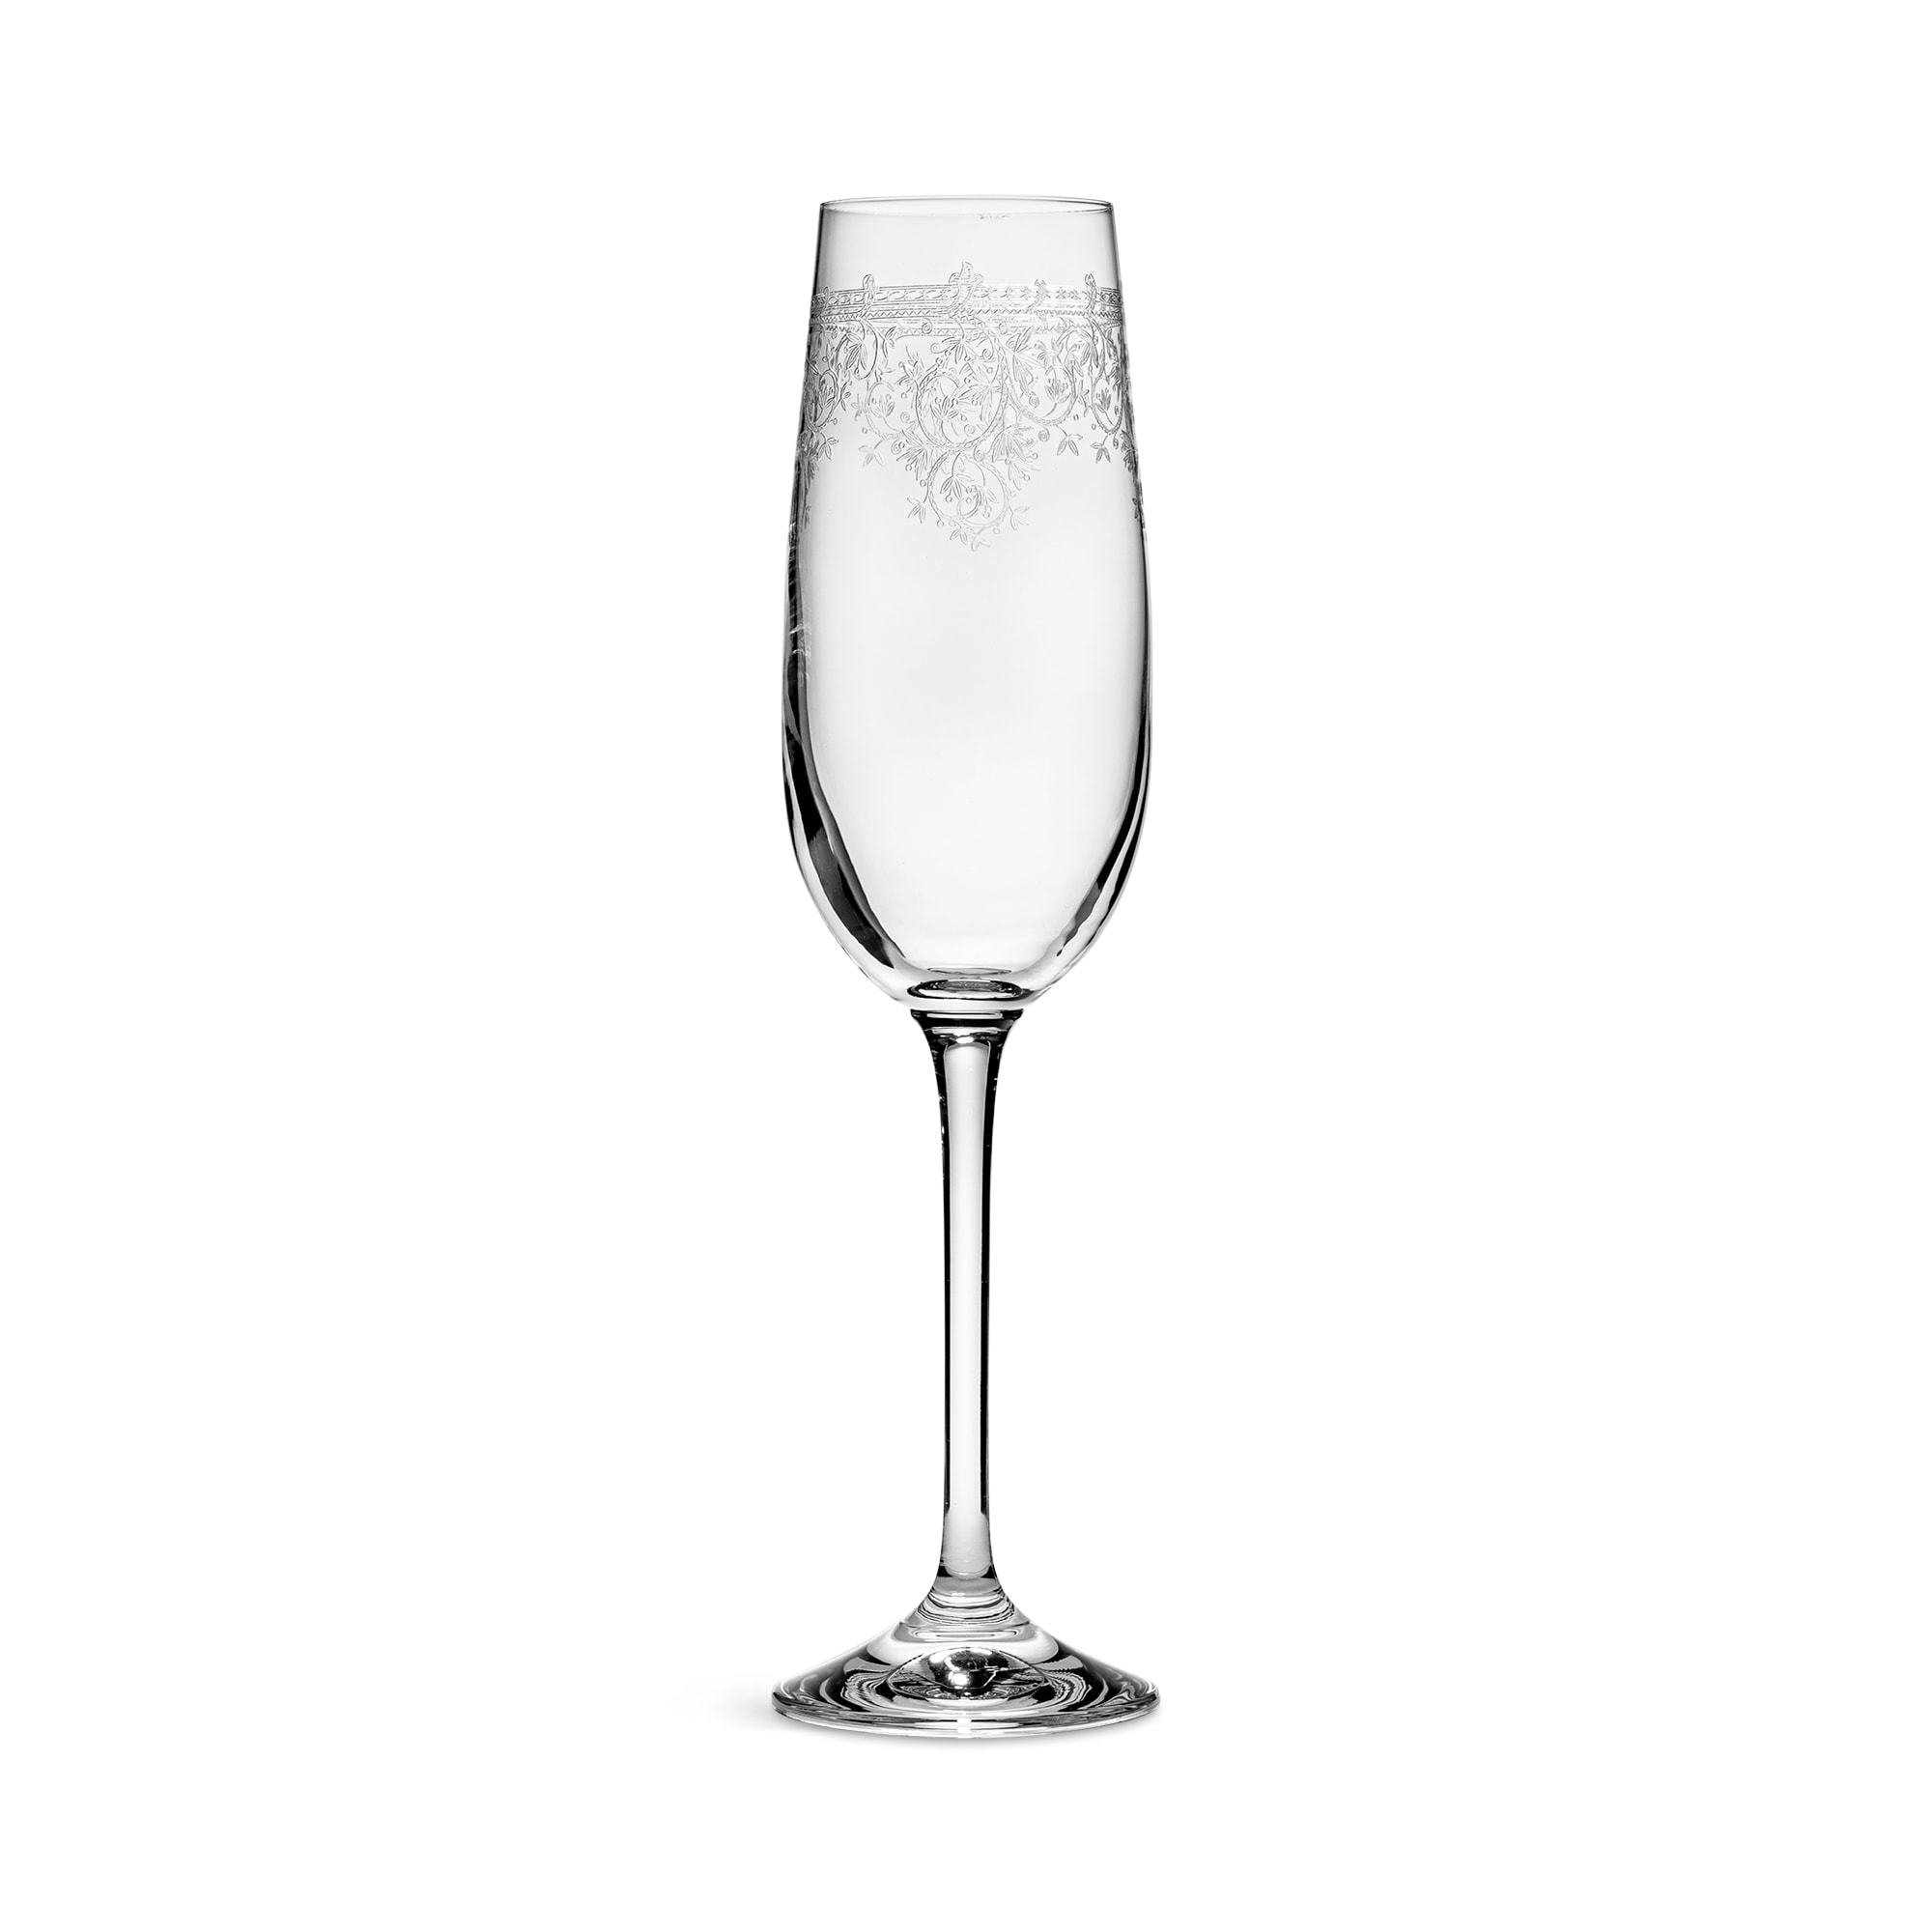 Champagne flute Tipsy Turvy Bubbly 180ml, set of 6 - Champagneglas